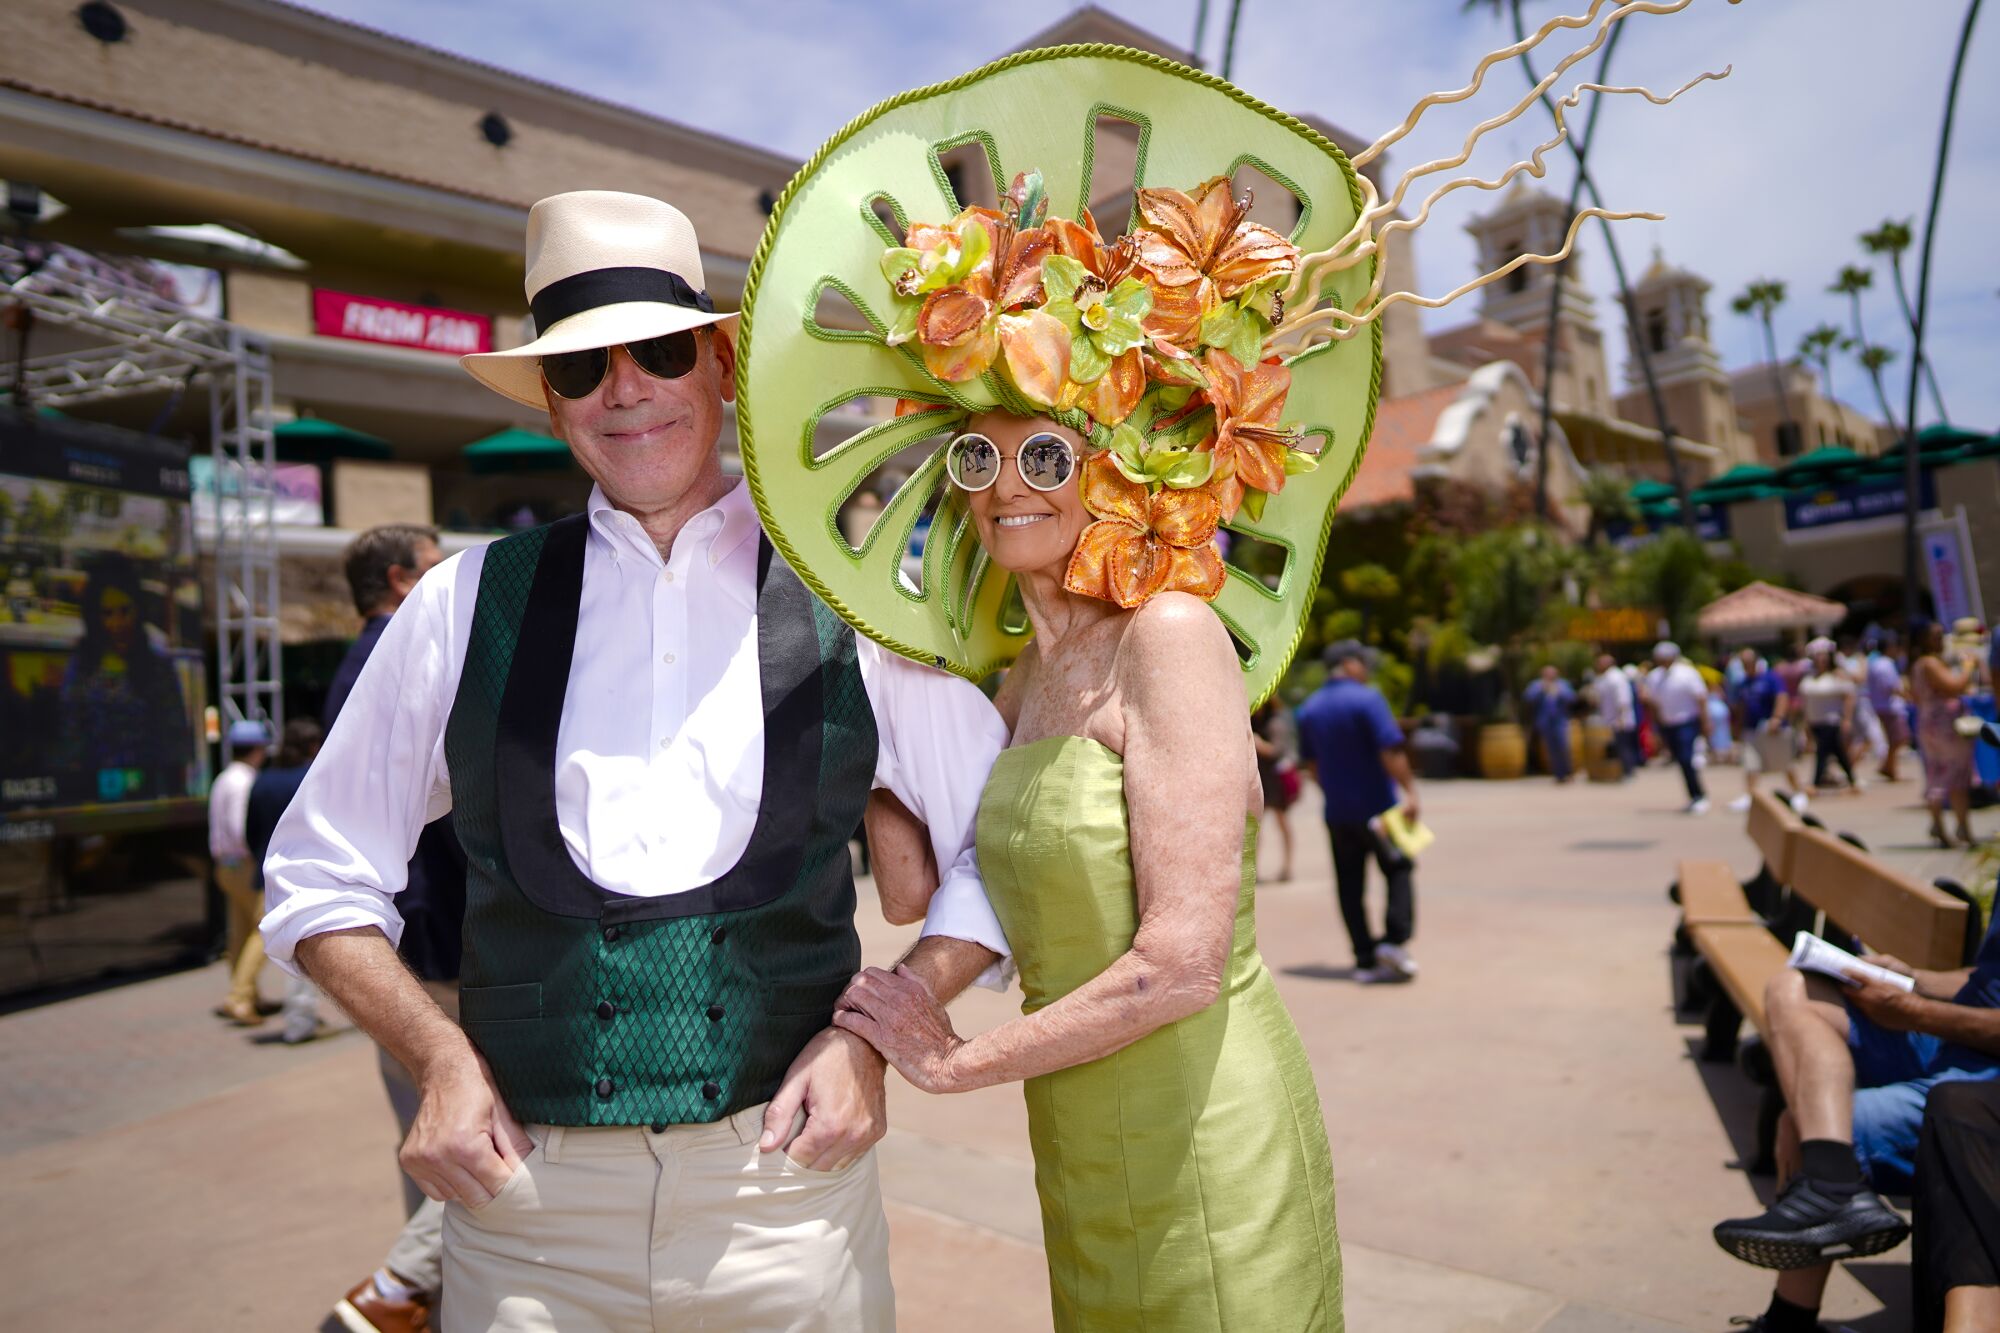 Life partners Thomas Barrett and Belinda Berry were among the race fans taking part in the tradition of wearing hats.